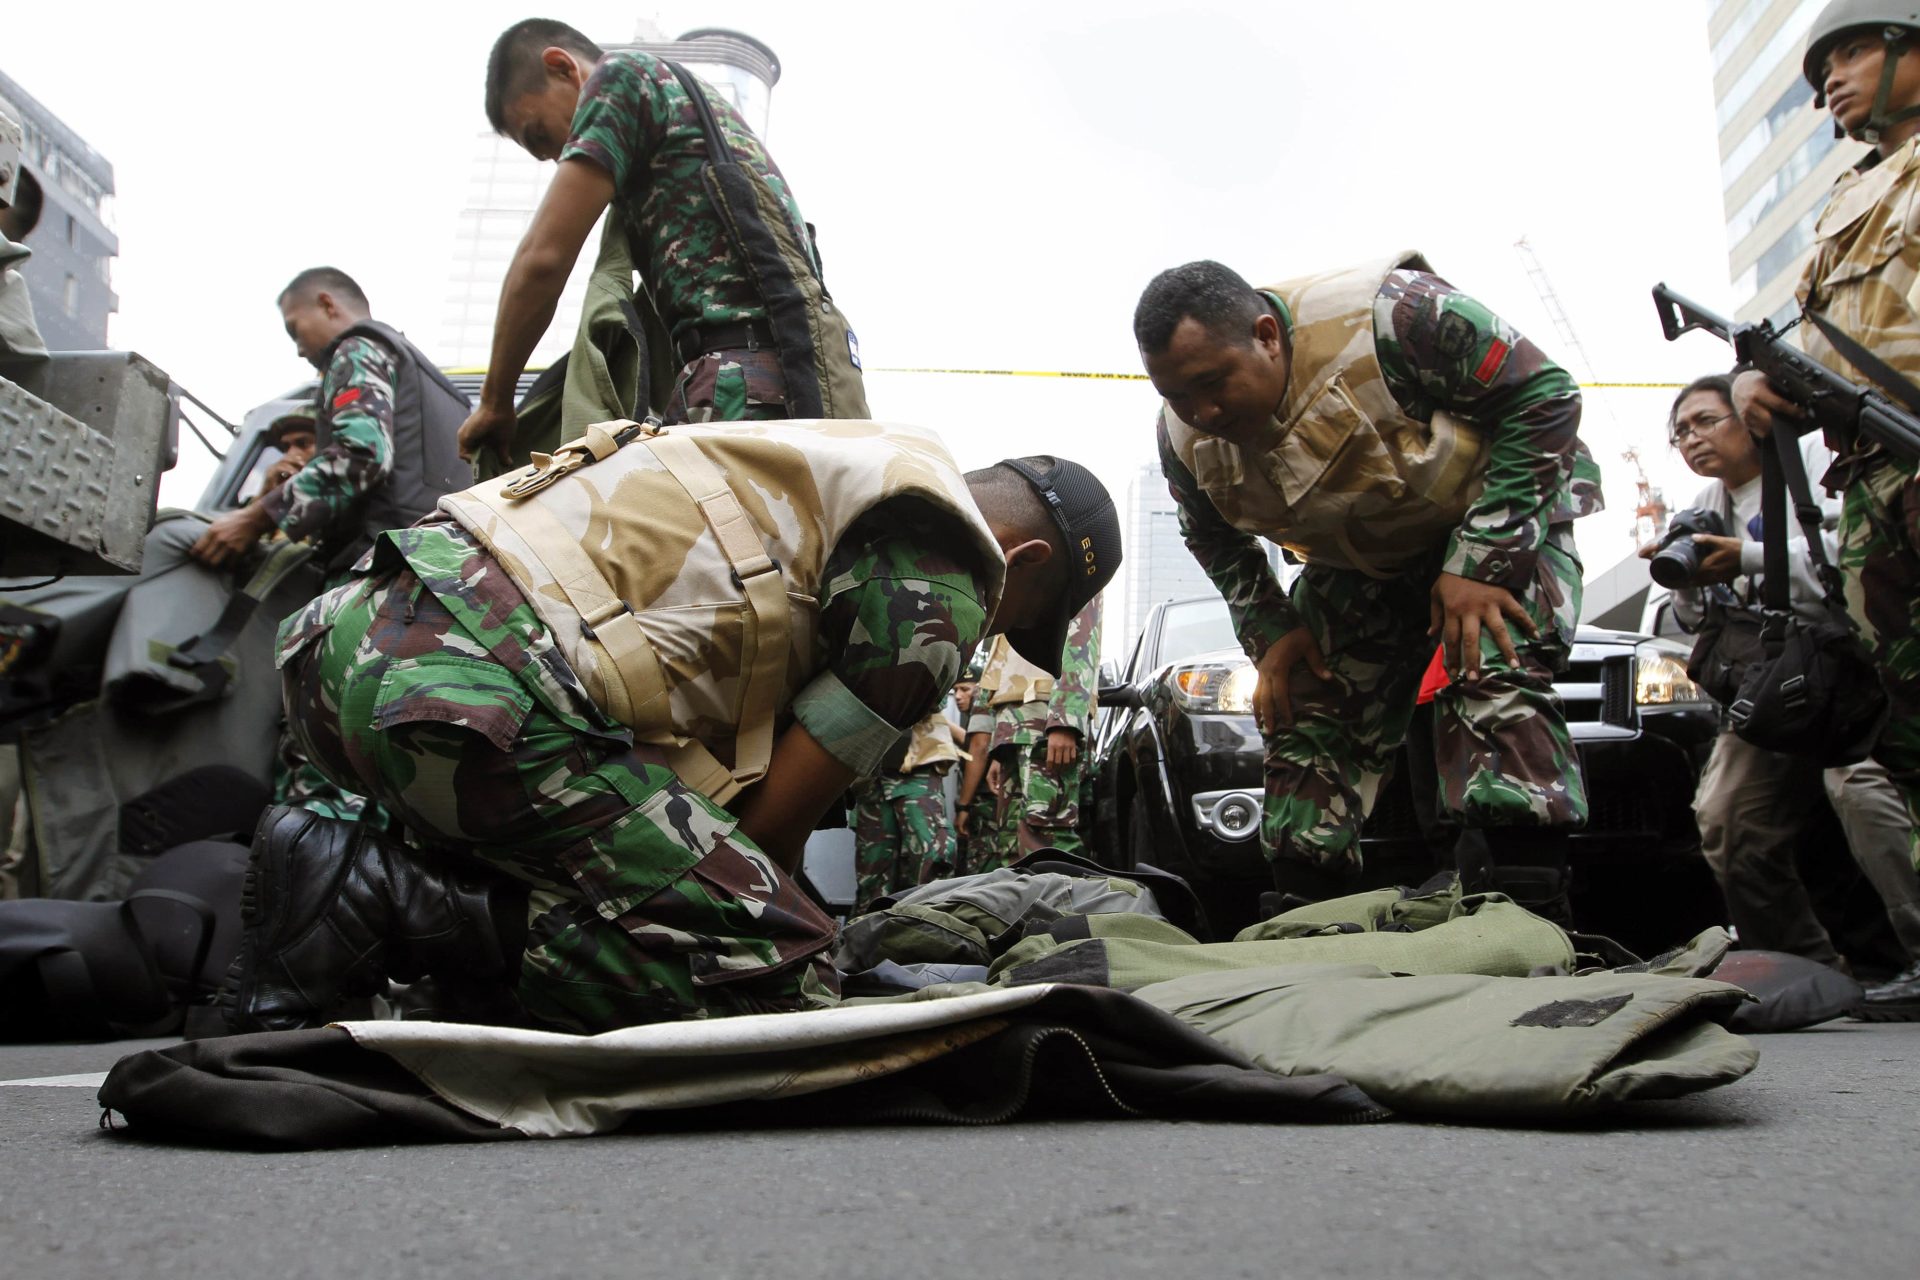 Indonesian soldiers work at the scene of a  14 January bomb blast in Jakarta, Indonesia. Several explosions went off and gunfire broke out in the center of the Indonesian capital that day and police said they suspected Islamic State militants were responsible for the blasts that killed at least eight people. Photo: CNS/Roni Bintang, EPA